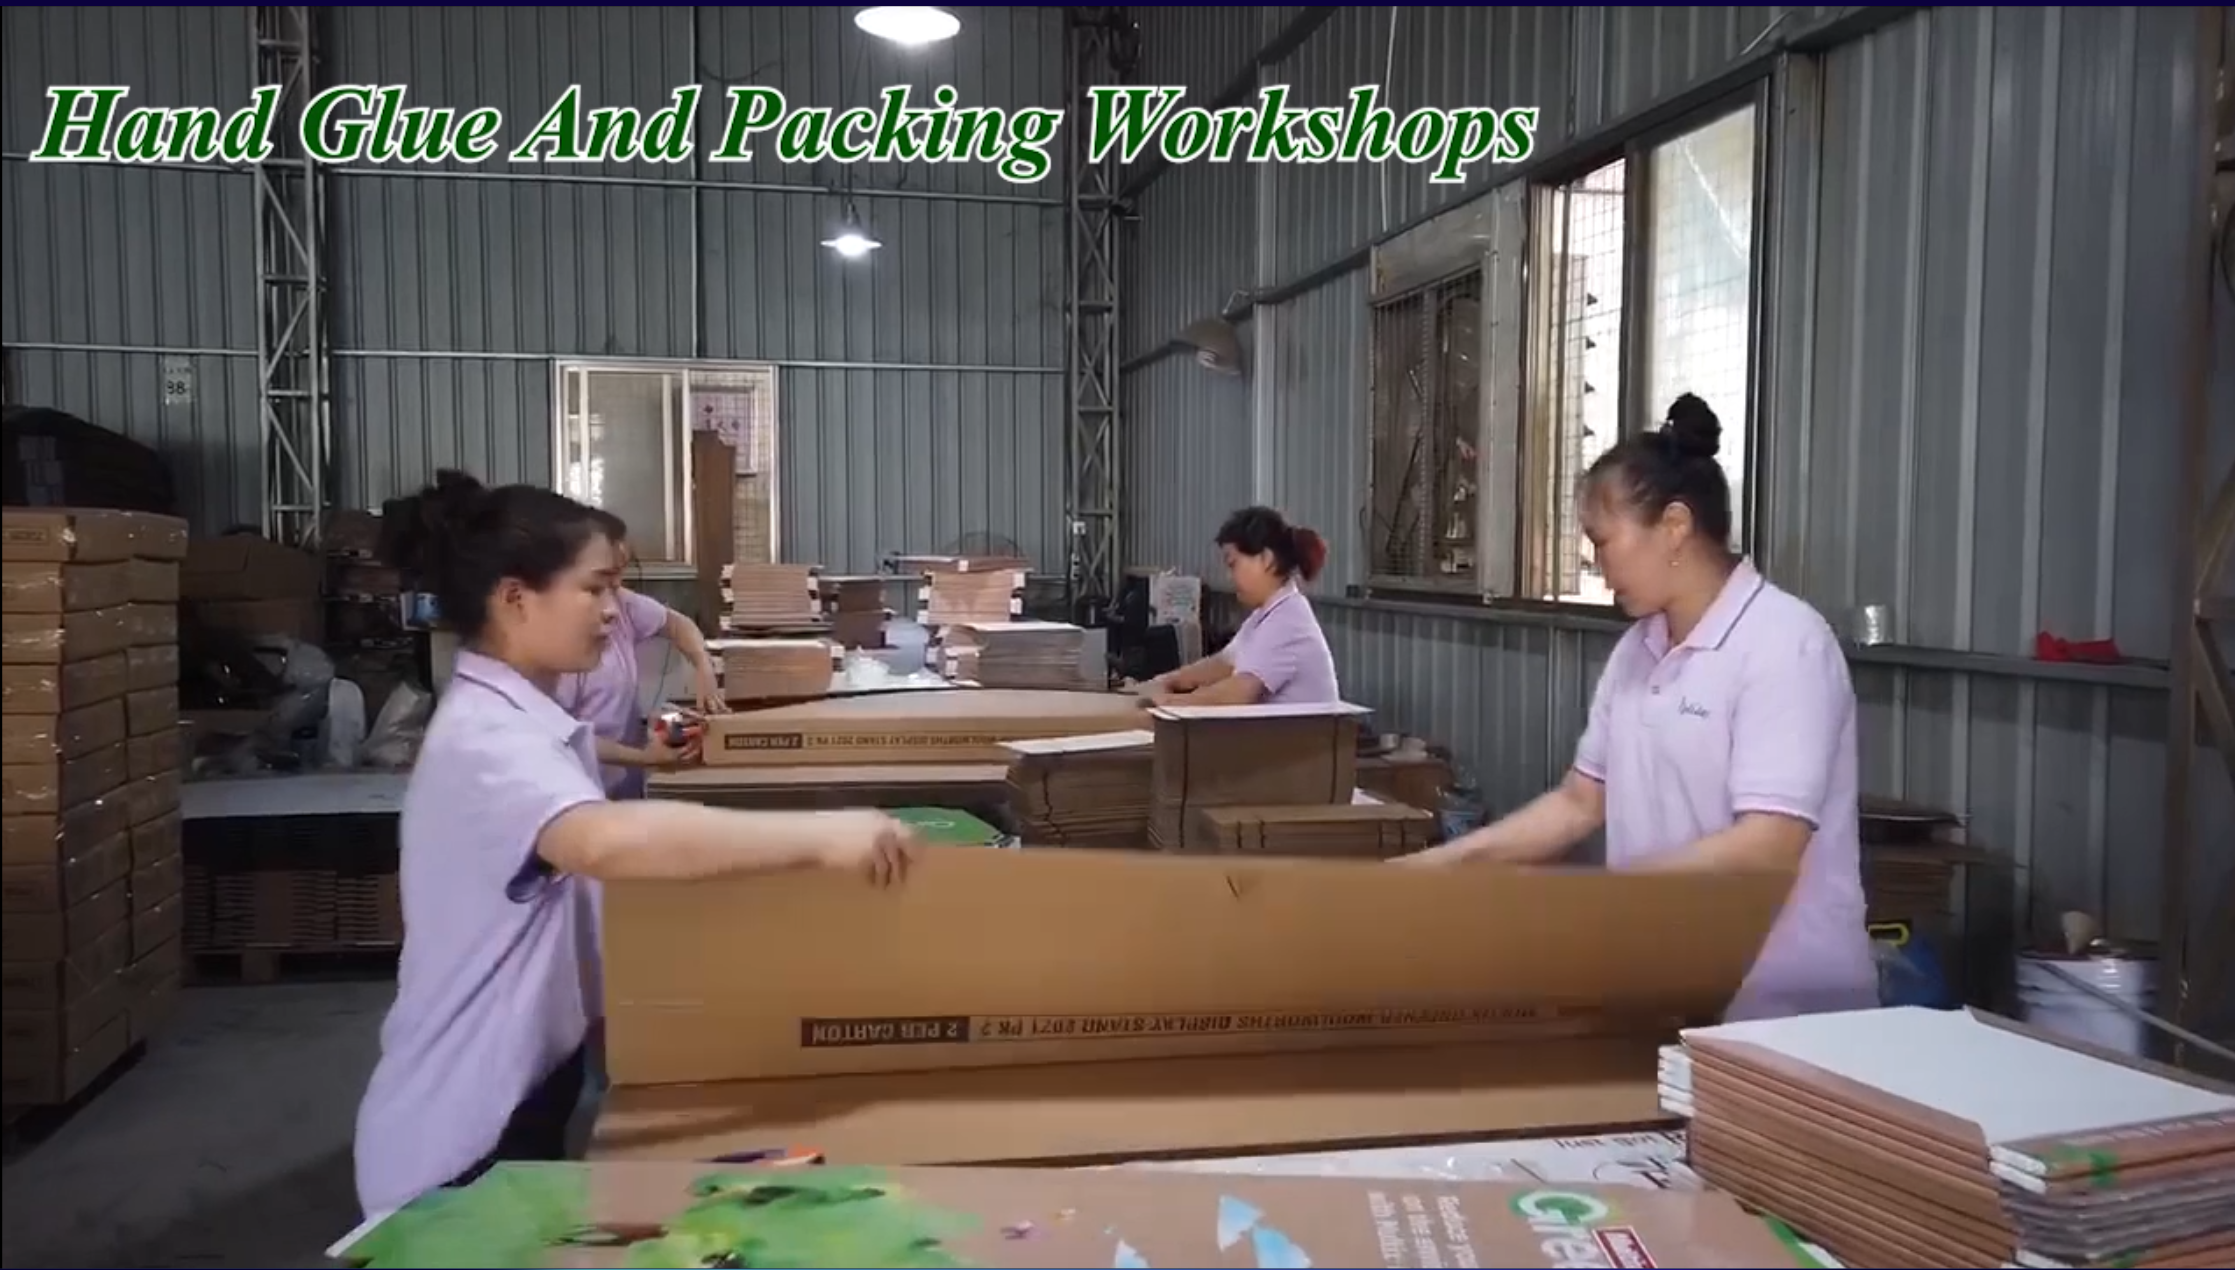 Holidaypac cardboard display and paper packaging glue and packing workshop